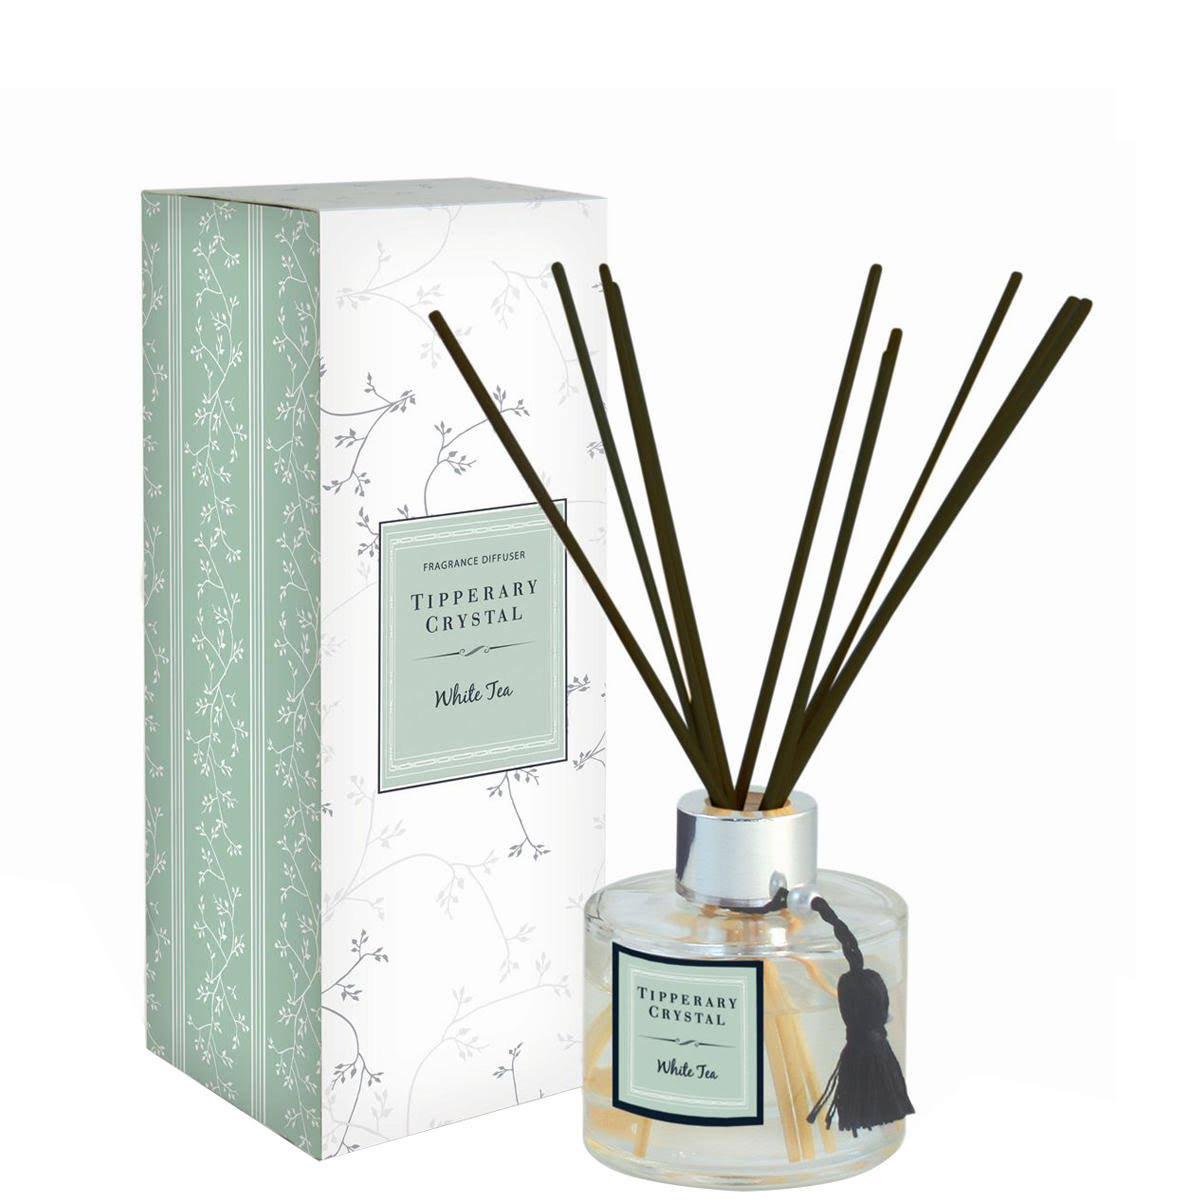 Tipperary Crystal White Tea Fragranced Diffuser